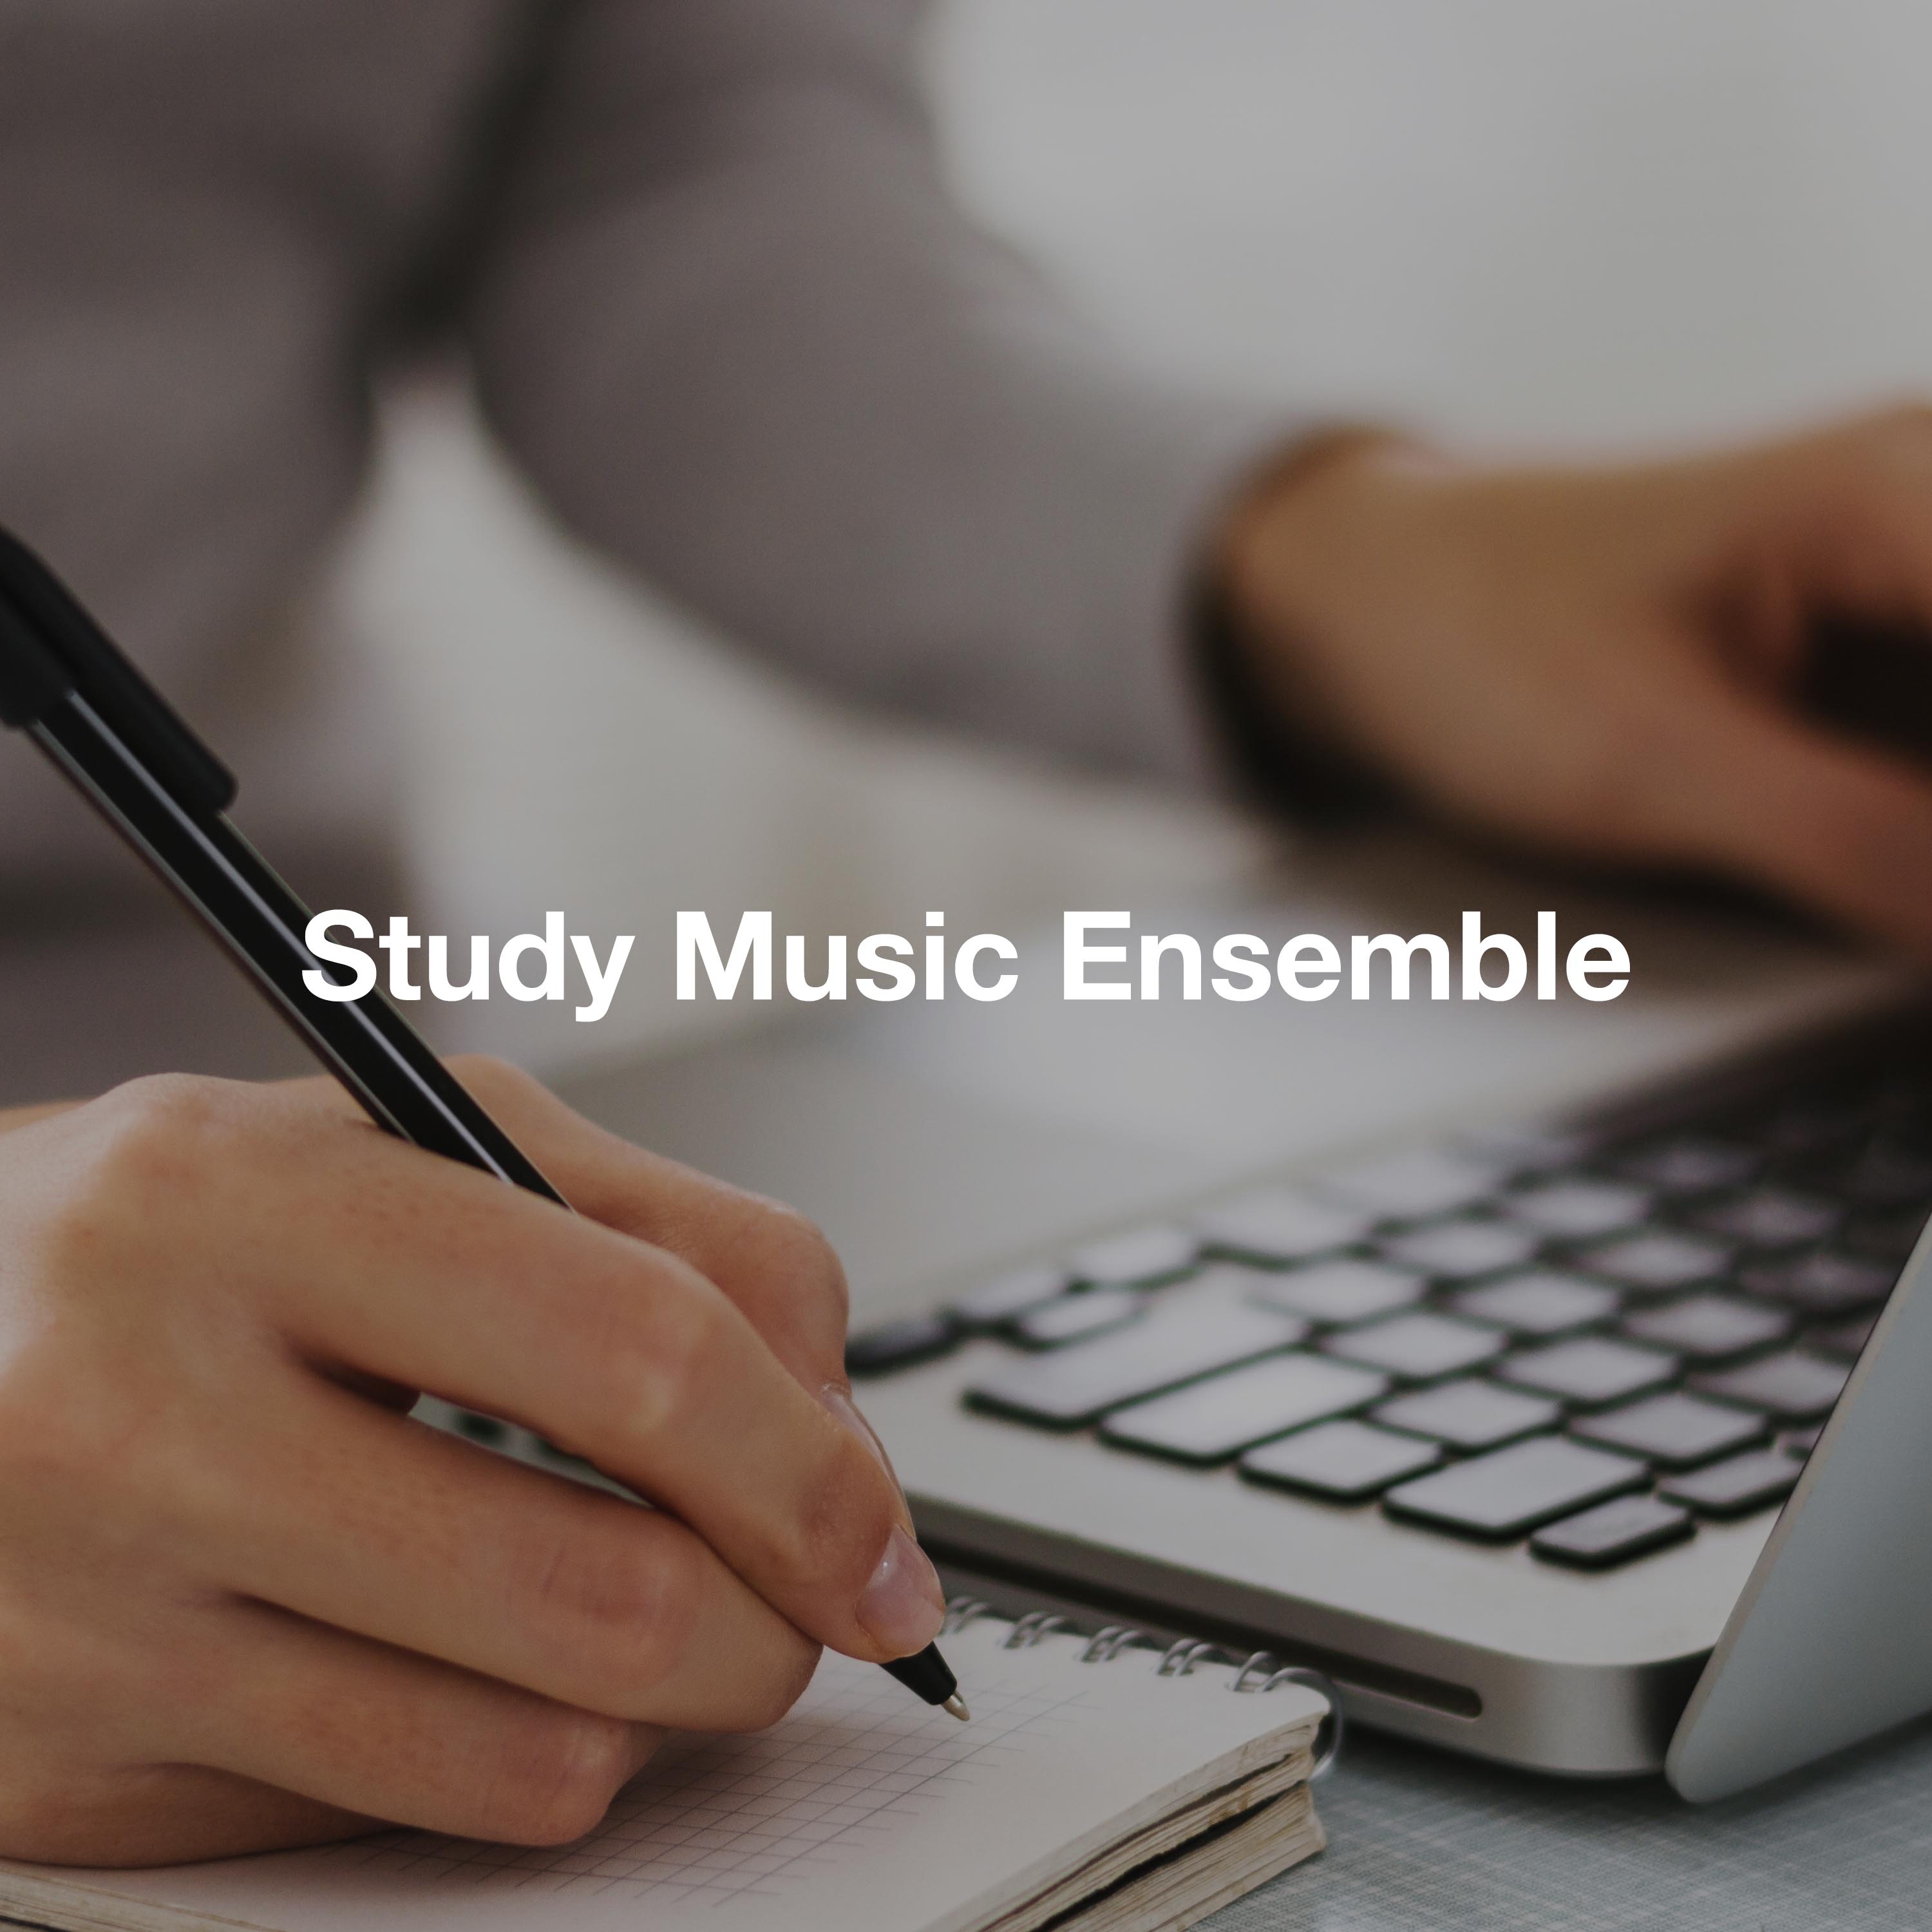 Study Music Ensemble - Relaxing Music, Calming Piano Music, Nature Sounds, Mind Power